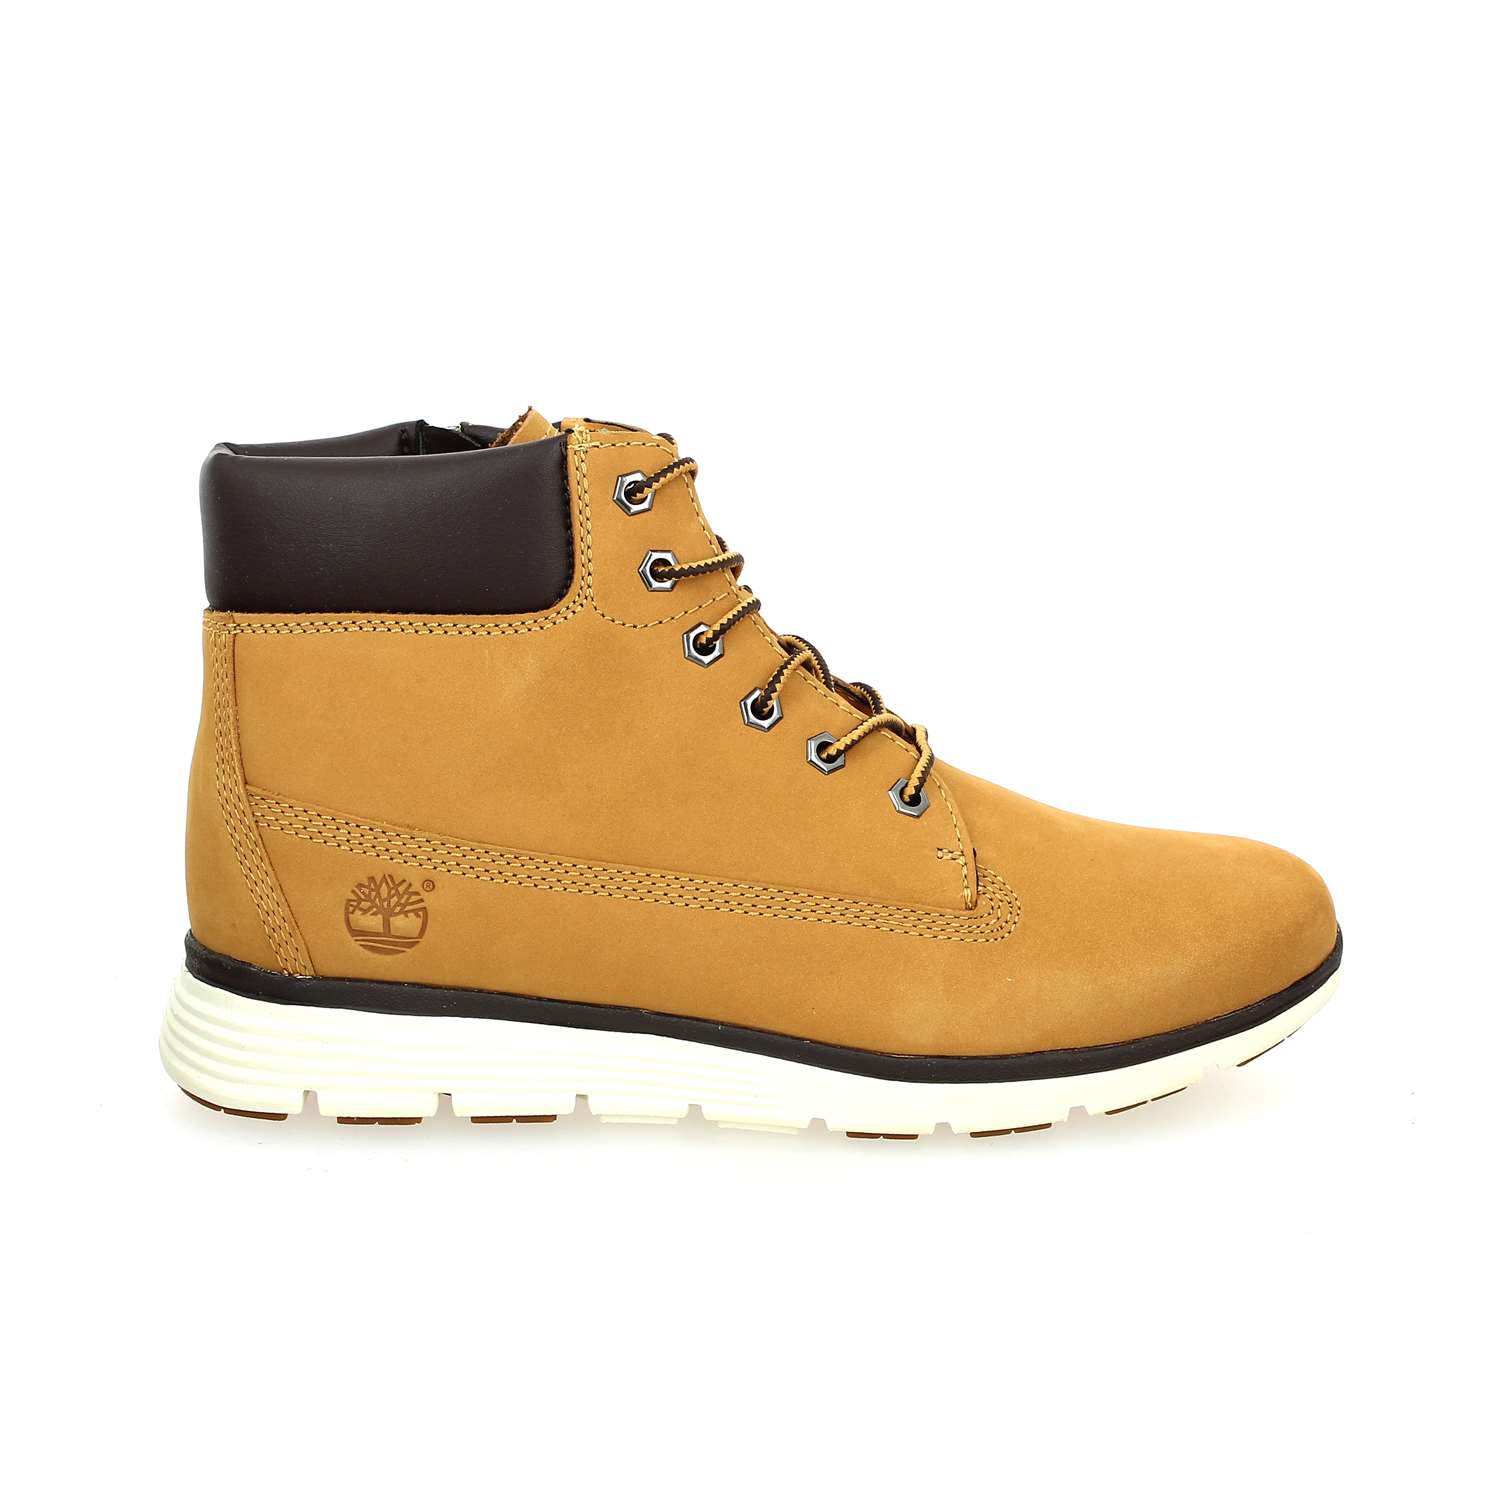 02 - KILLING TOWN - TIMBERLAND - Chaussures montantes - Nubuck